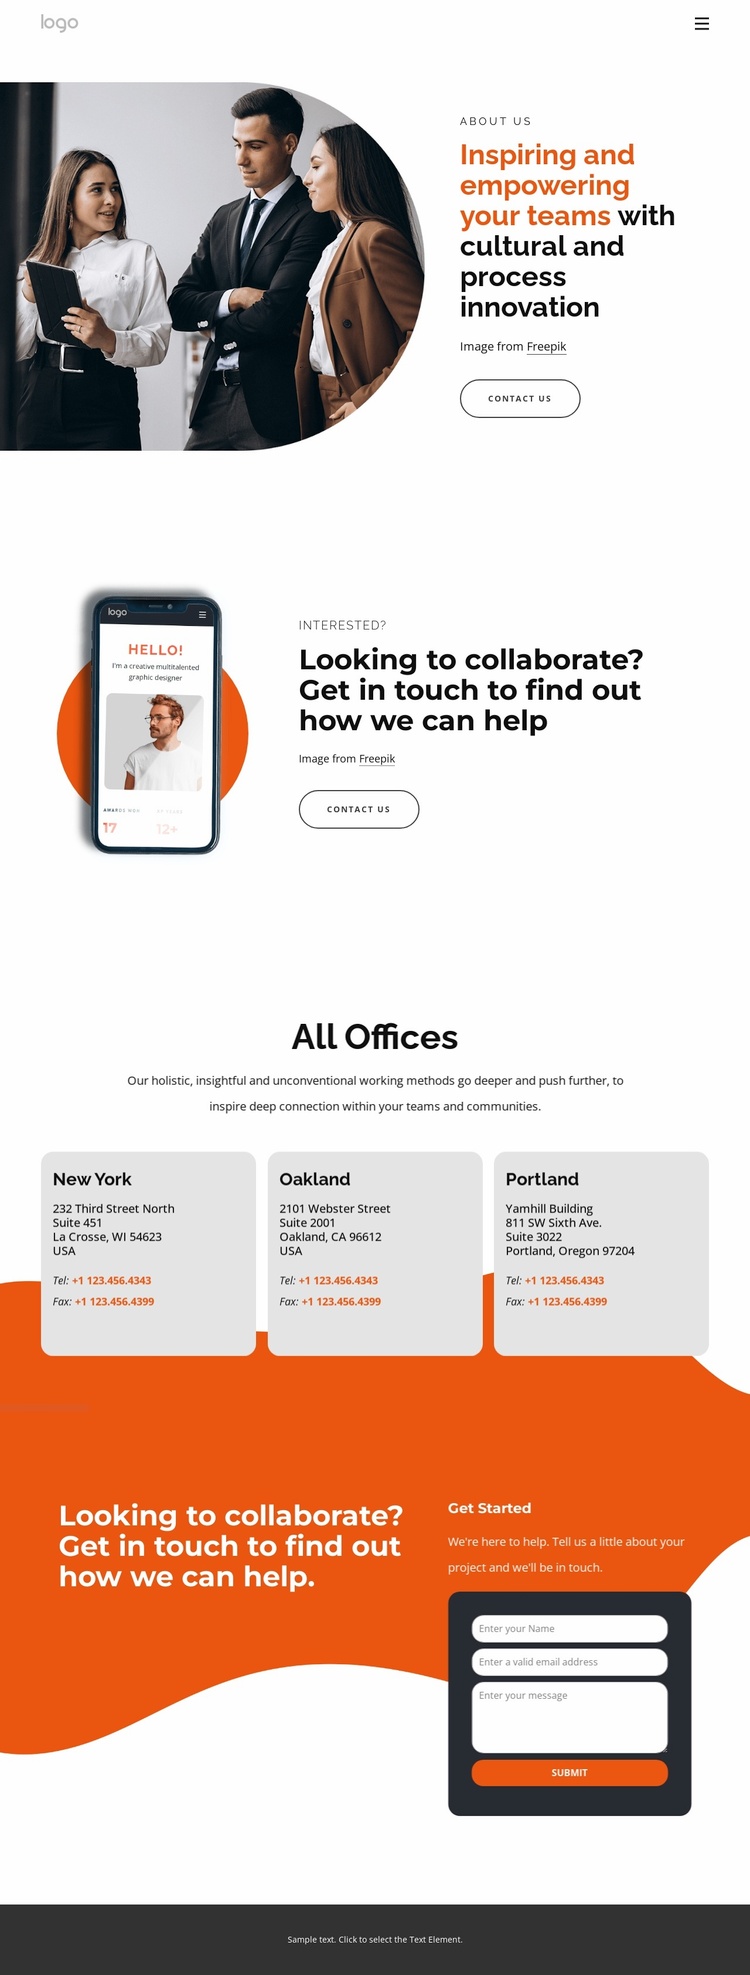 Product-based strategic solutions Landing Page